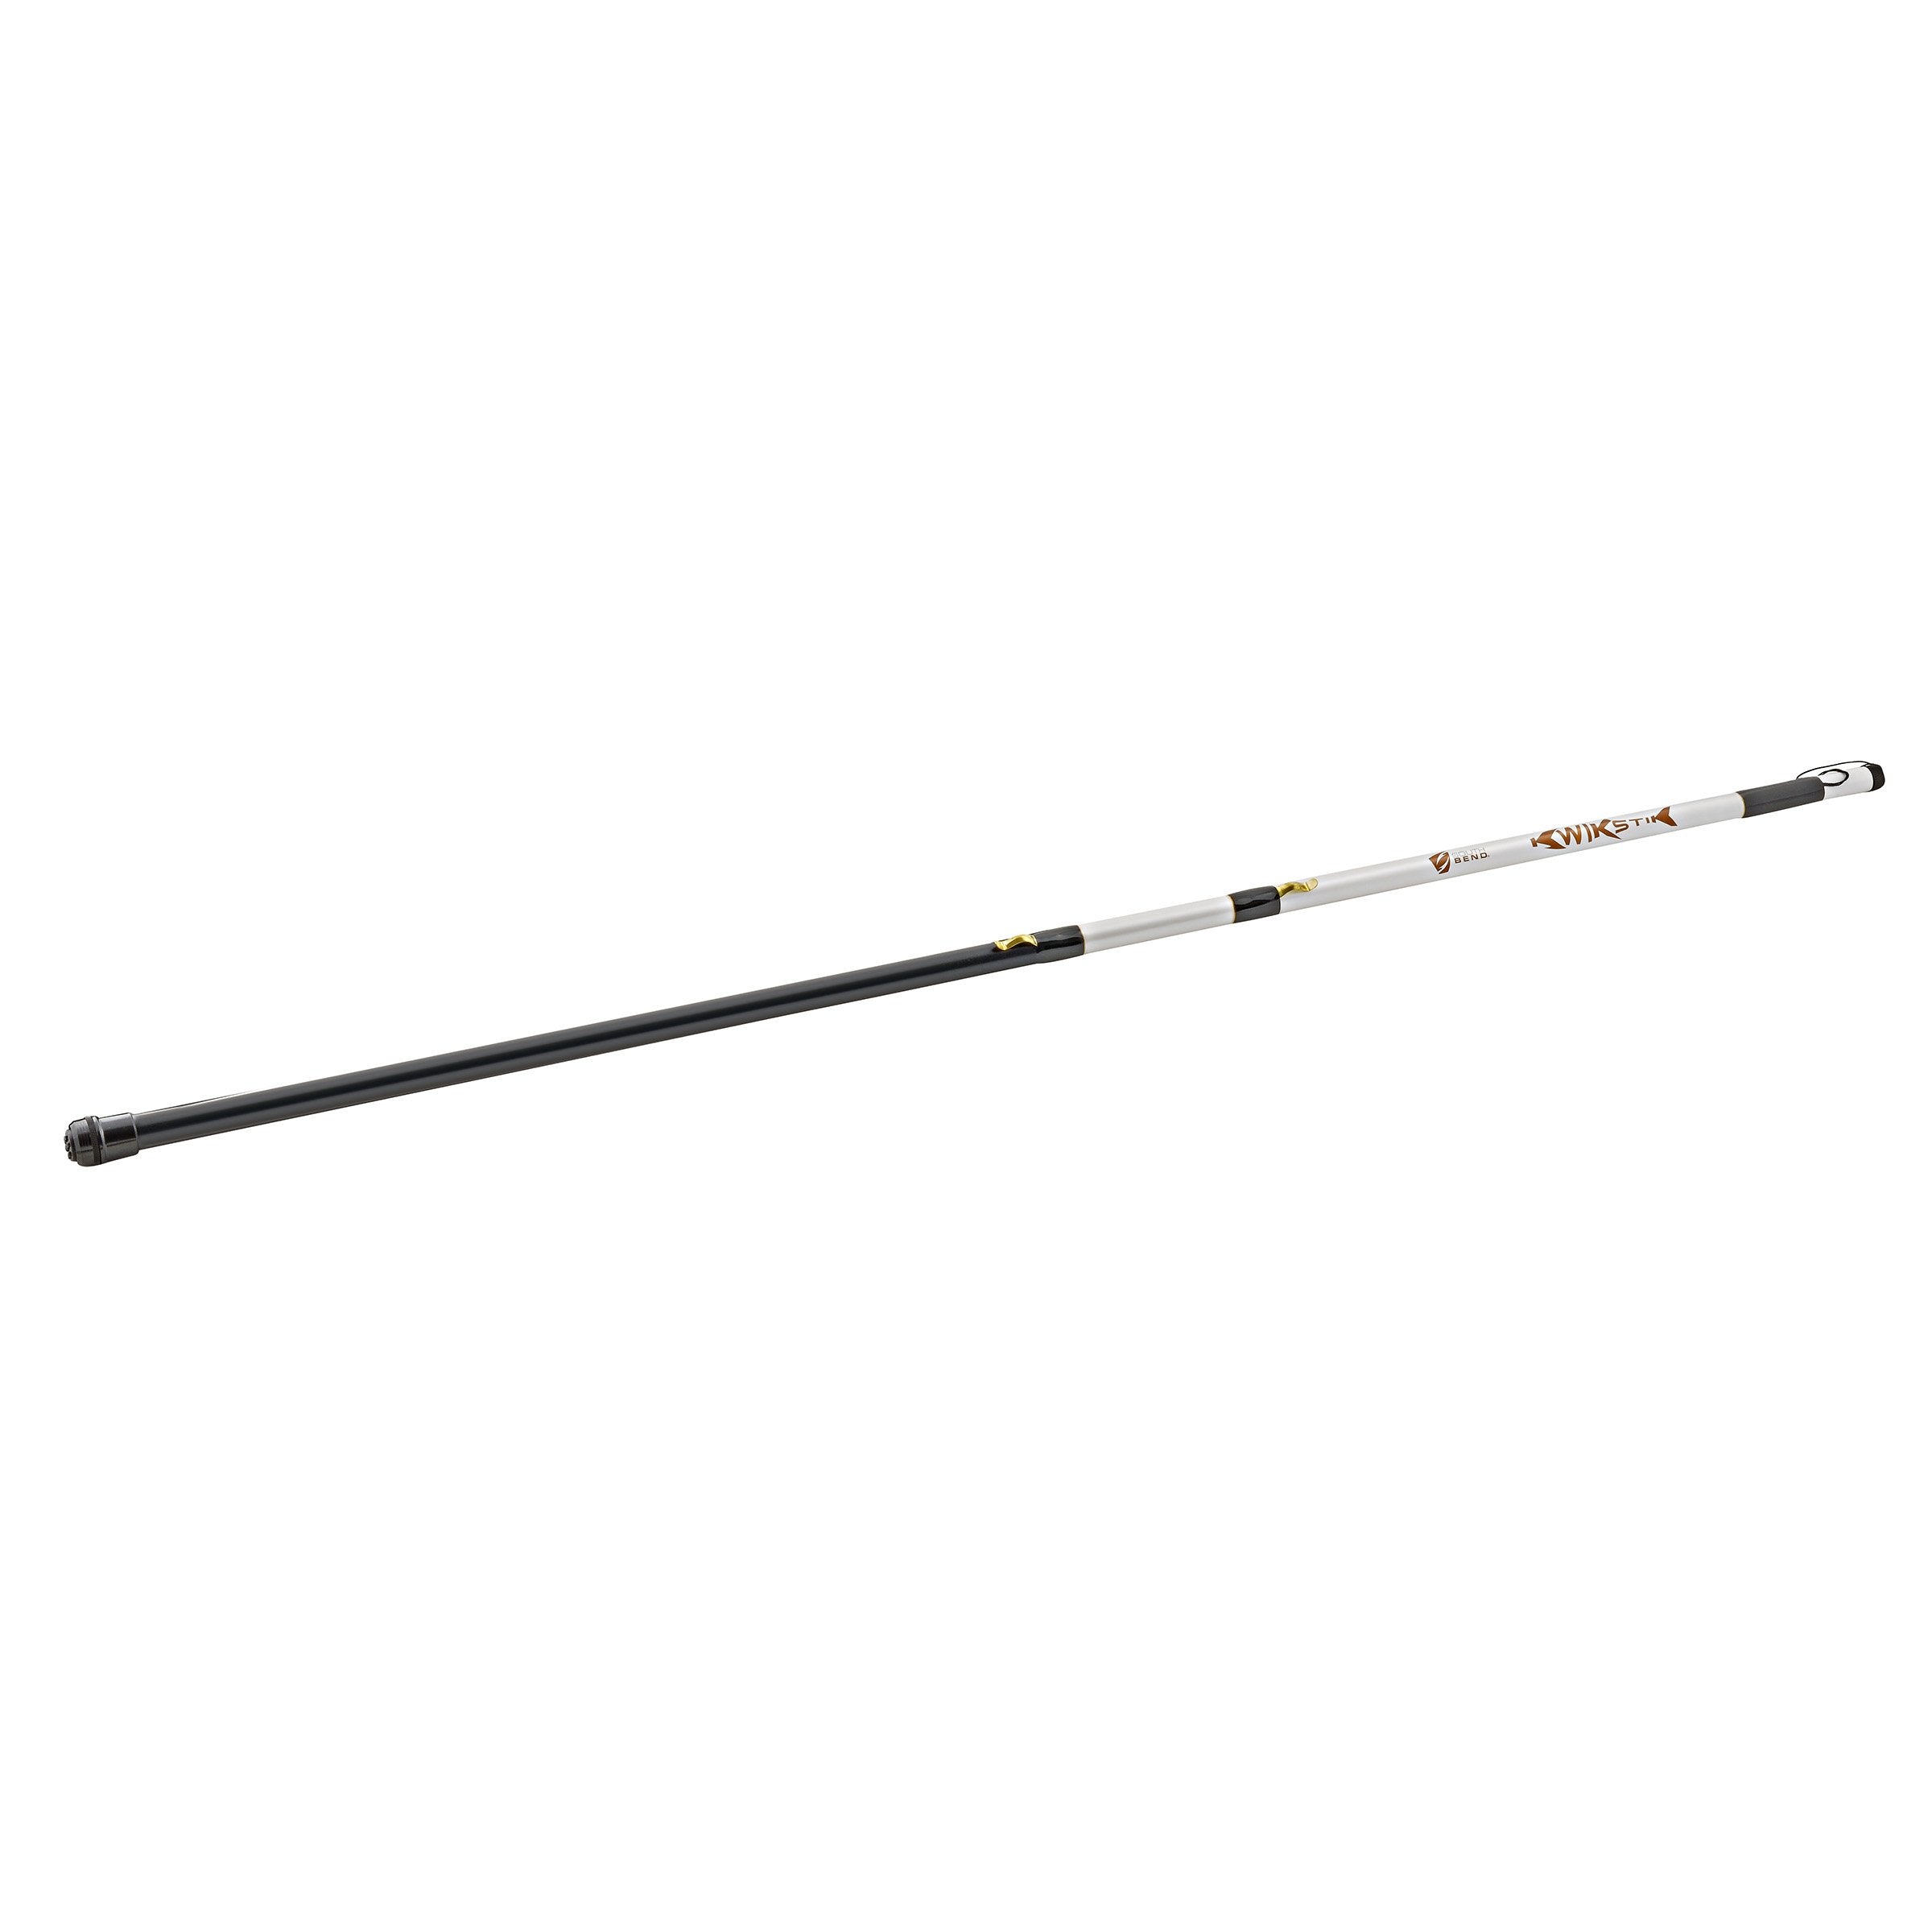 South Bend® Crappie Stalker Bream Pole